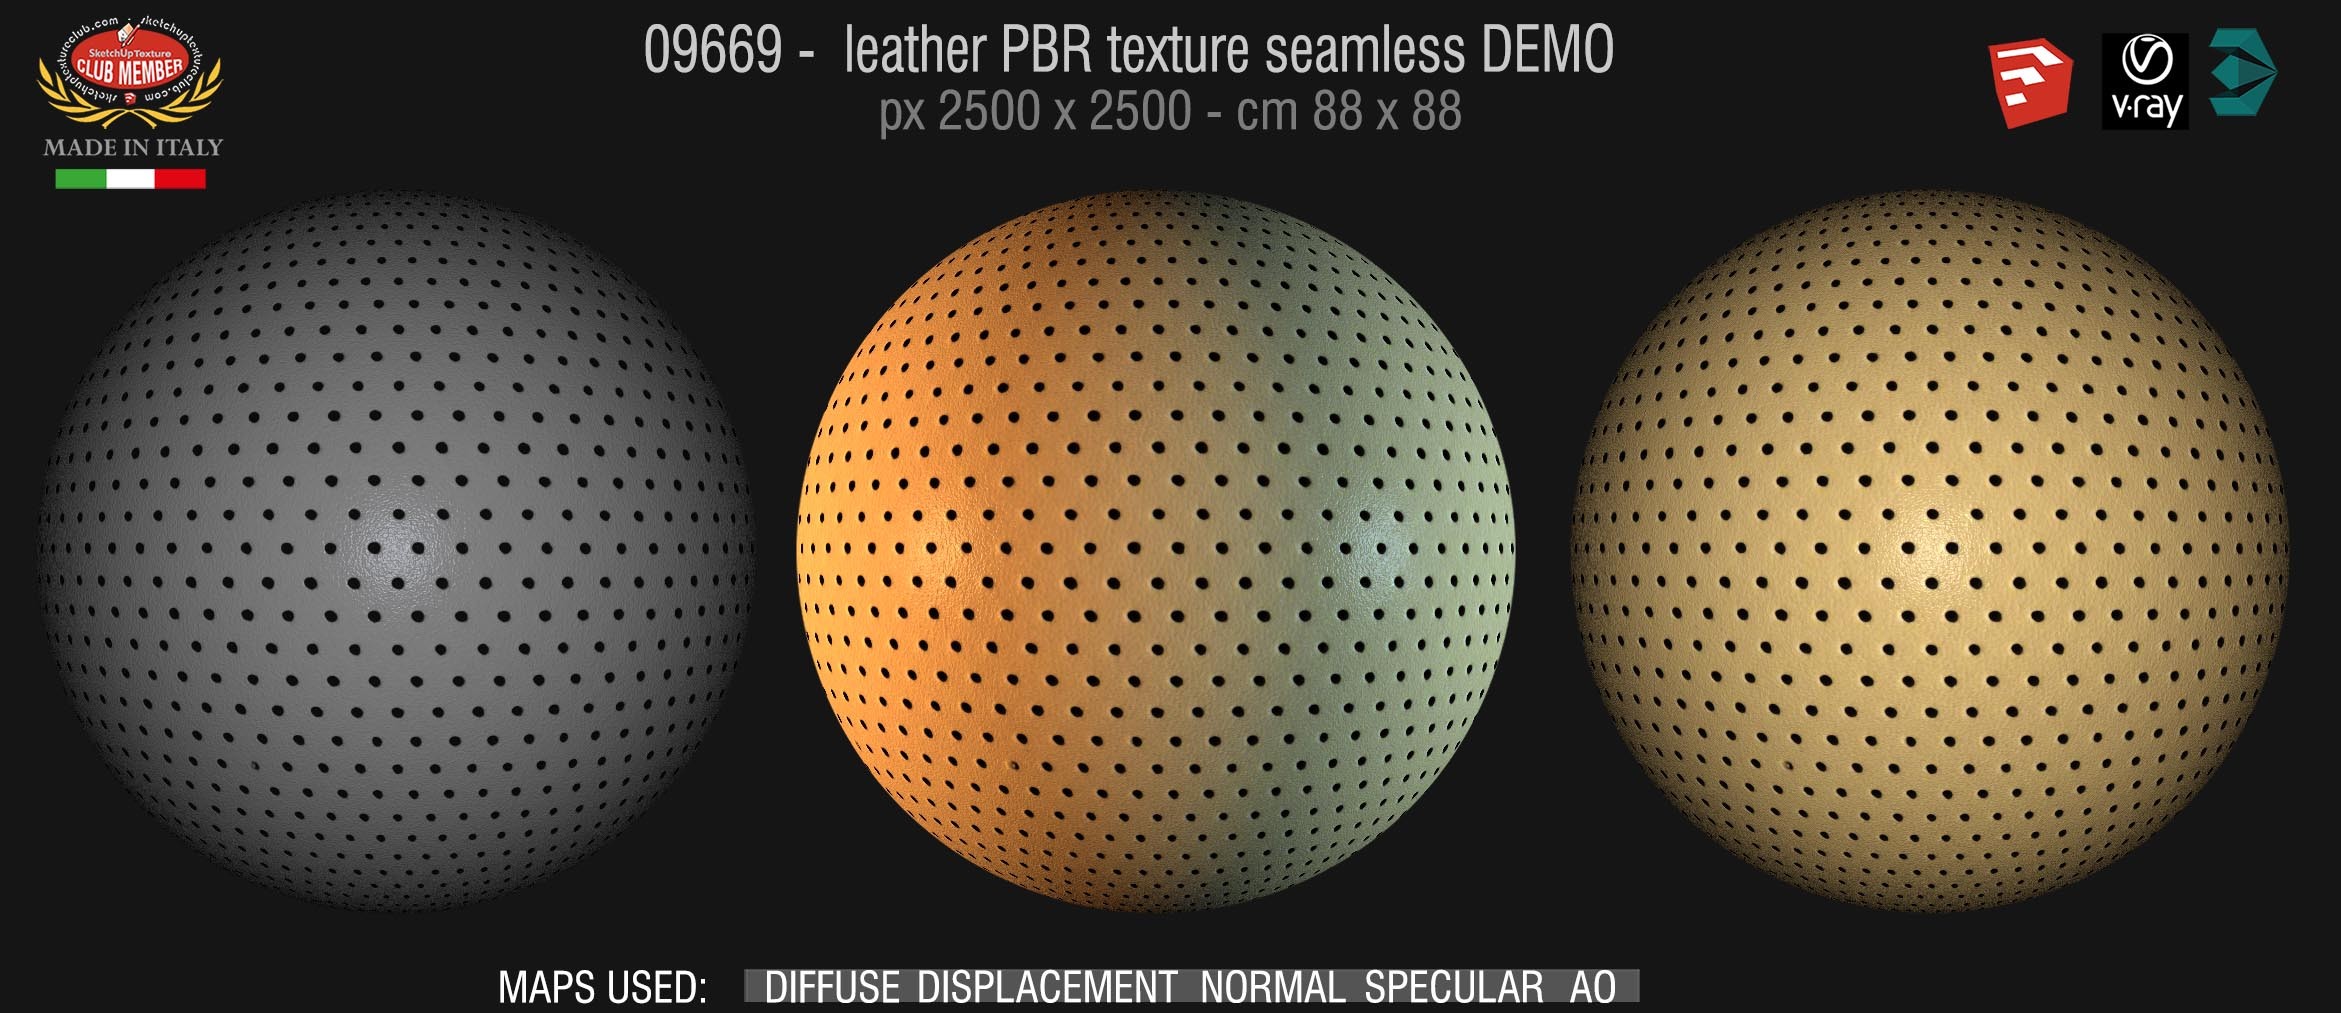 09669 leather PBR texture seamless DEMO